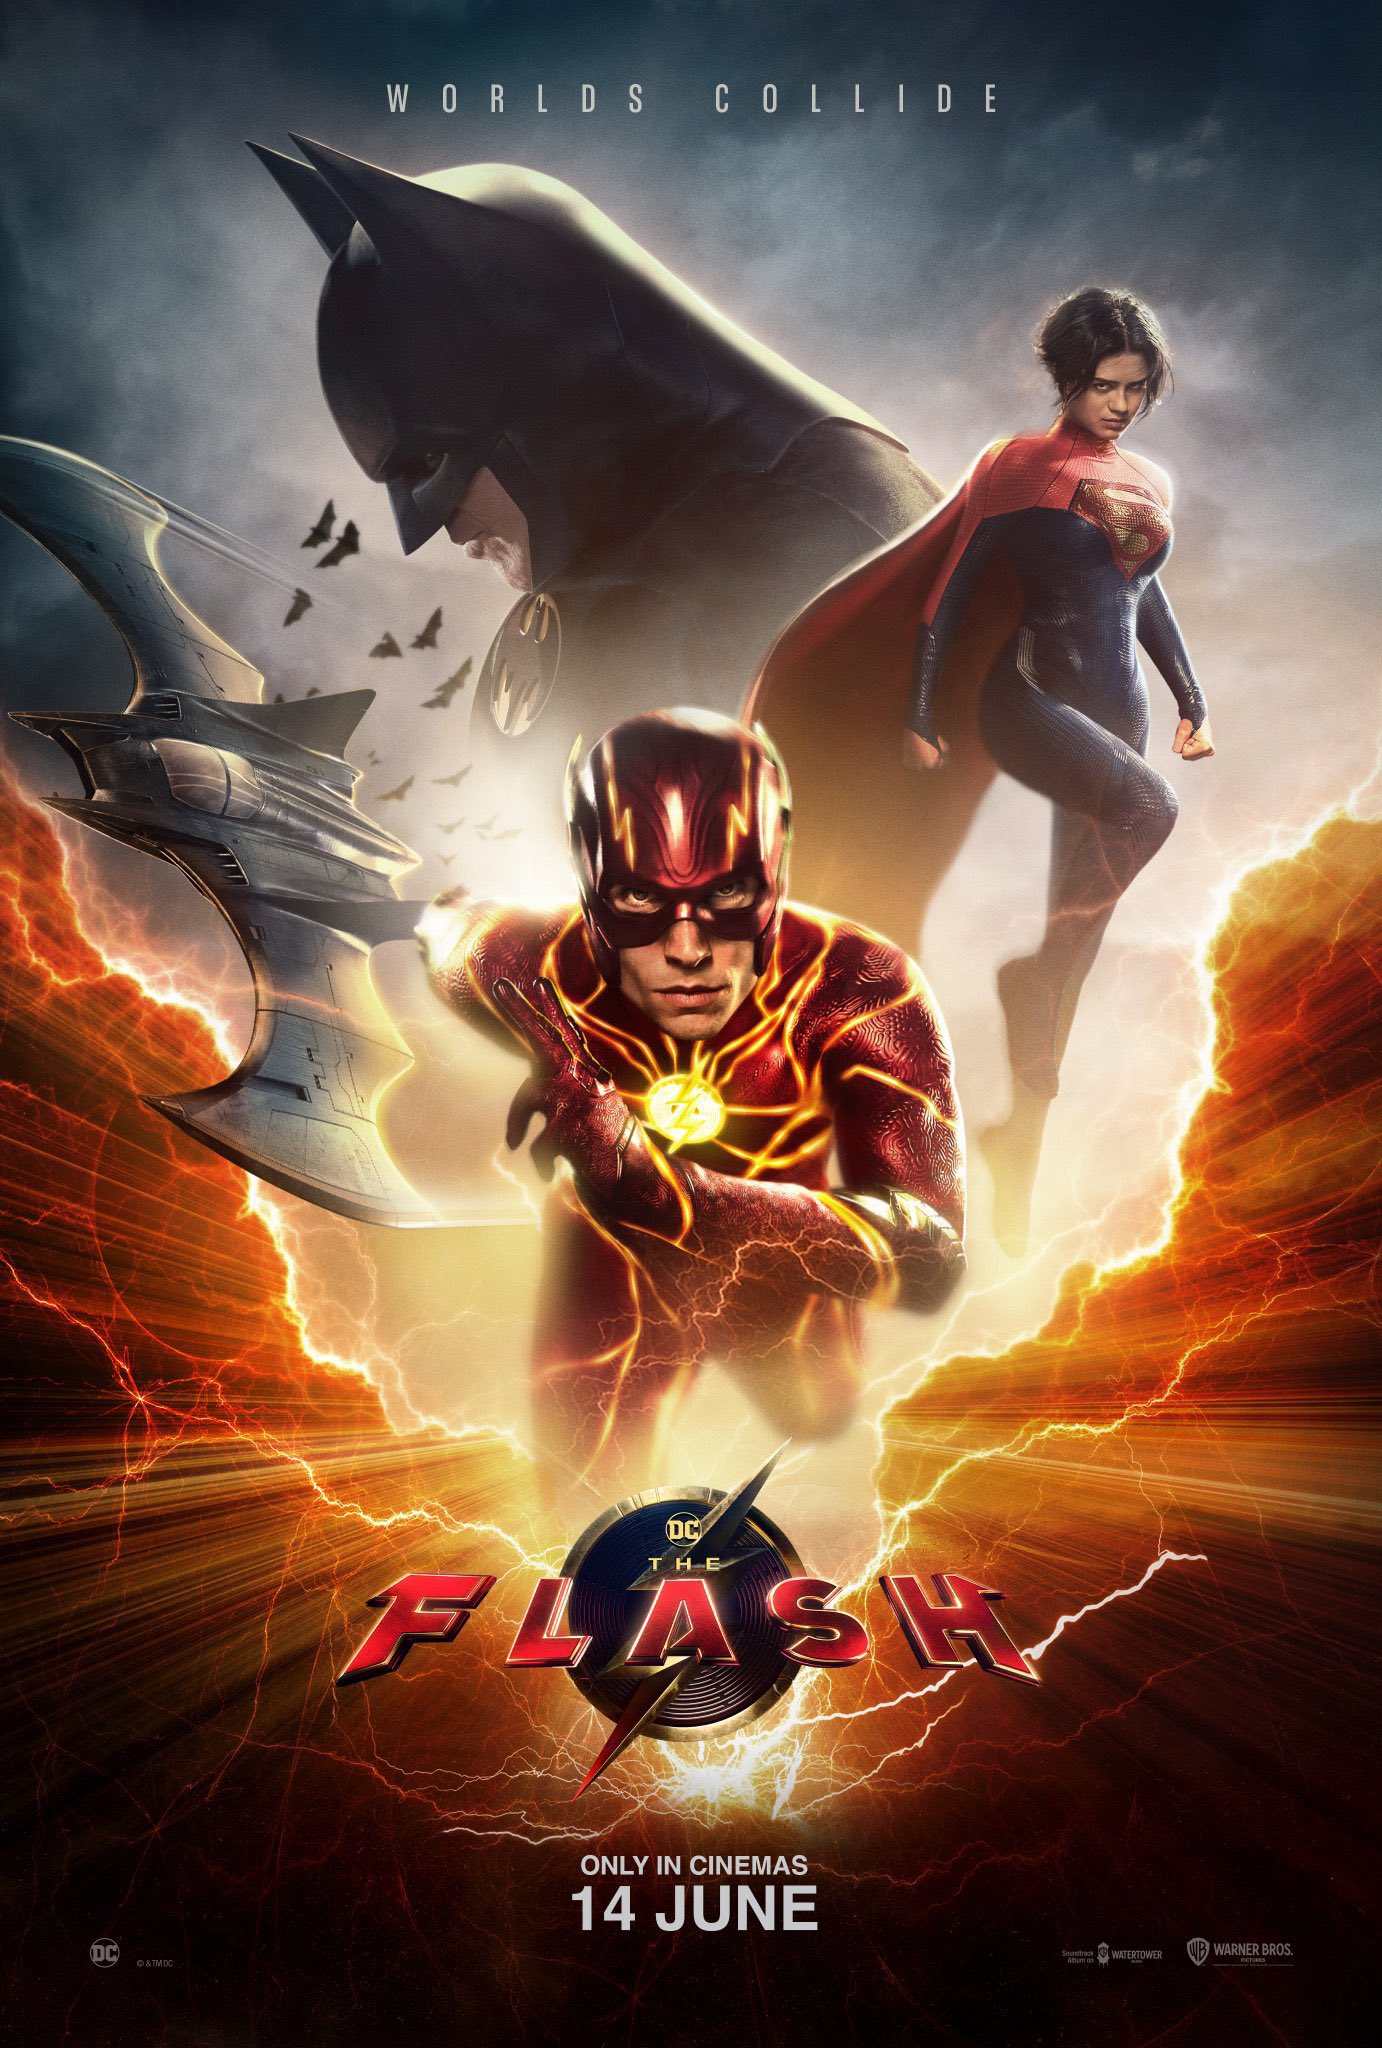 The Flash movie posters